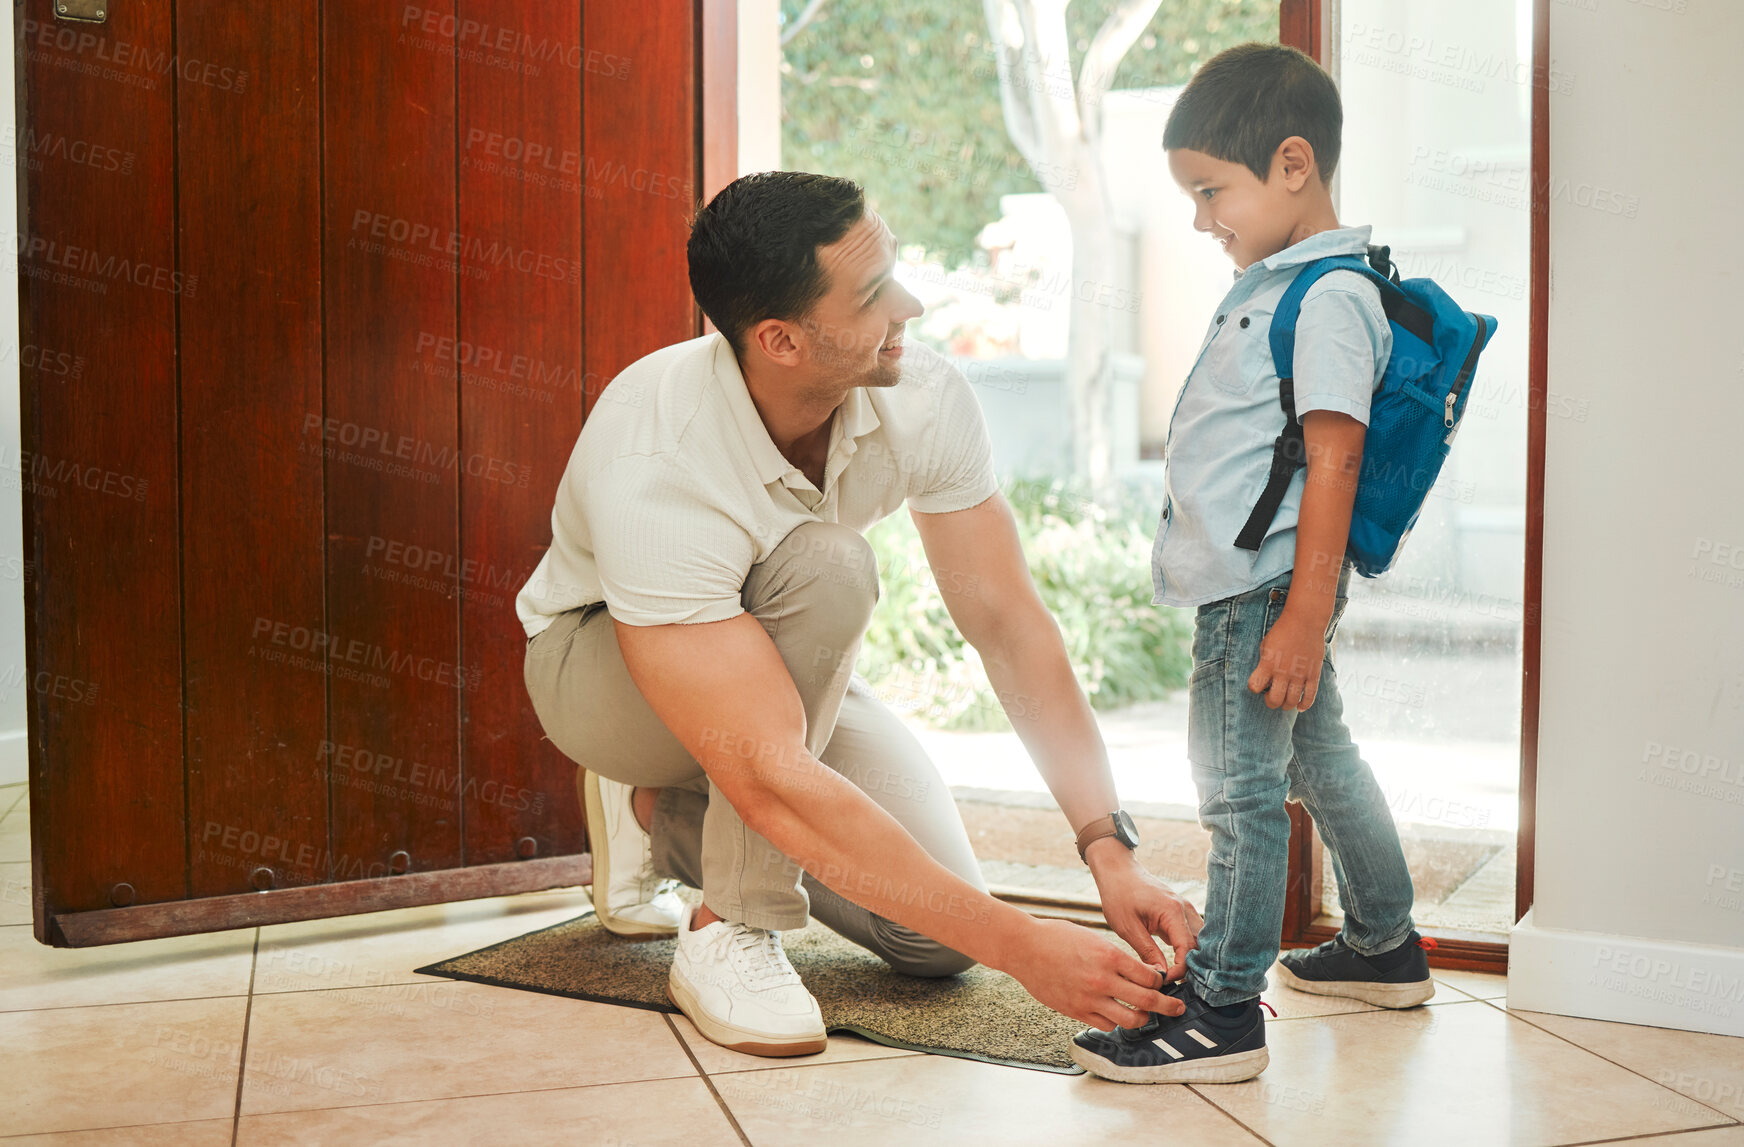 Buy stock photo Happy single father tying his son's shoelaces before school in the morning. Adorable mixed race little boy carrying a backpack and getting help from his single parent. Hispanic man and child at home